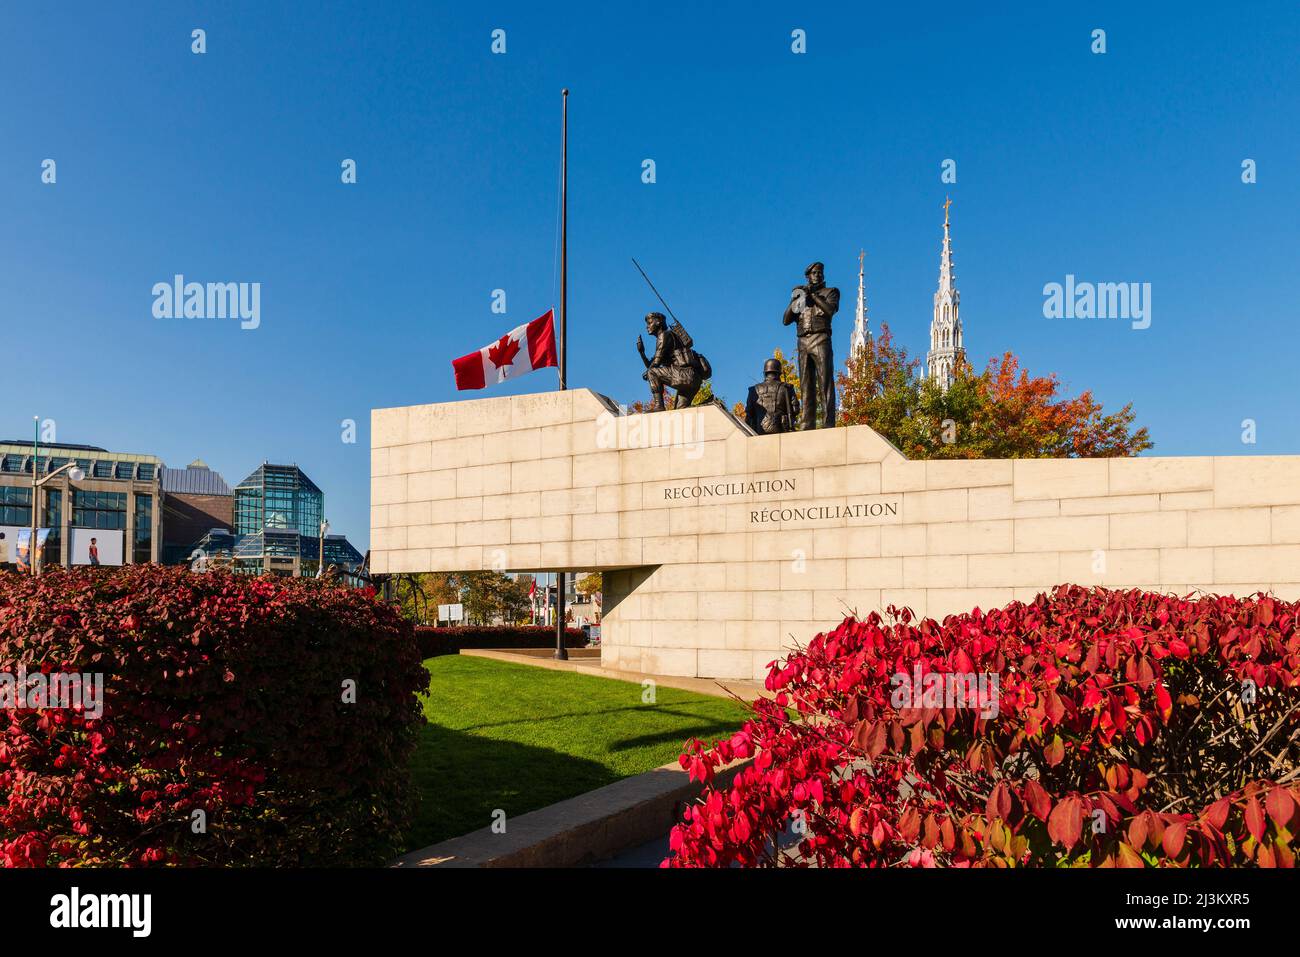 Reconciliation, the Peacekeeping Monument commemorating Canada's role in international peacekeeping and the soldiers who have participated and are ... Stock Photo